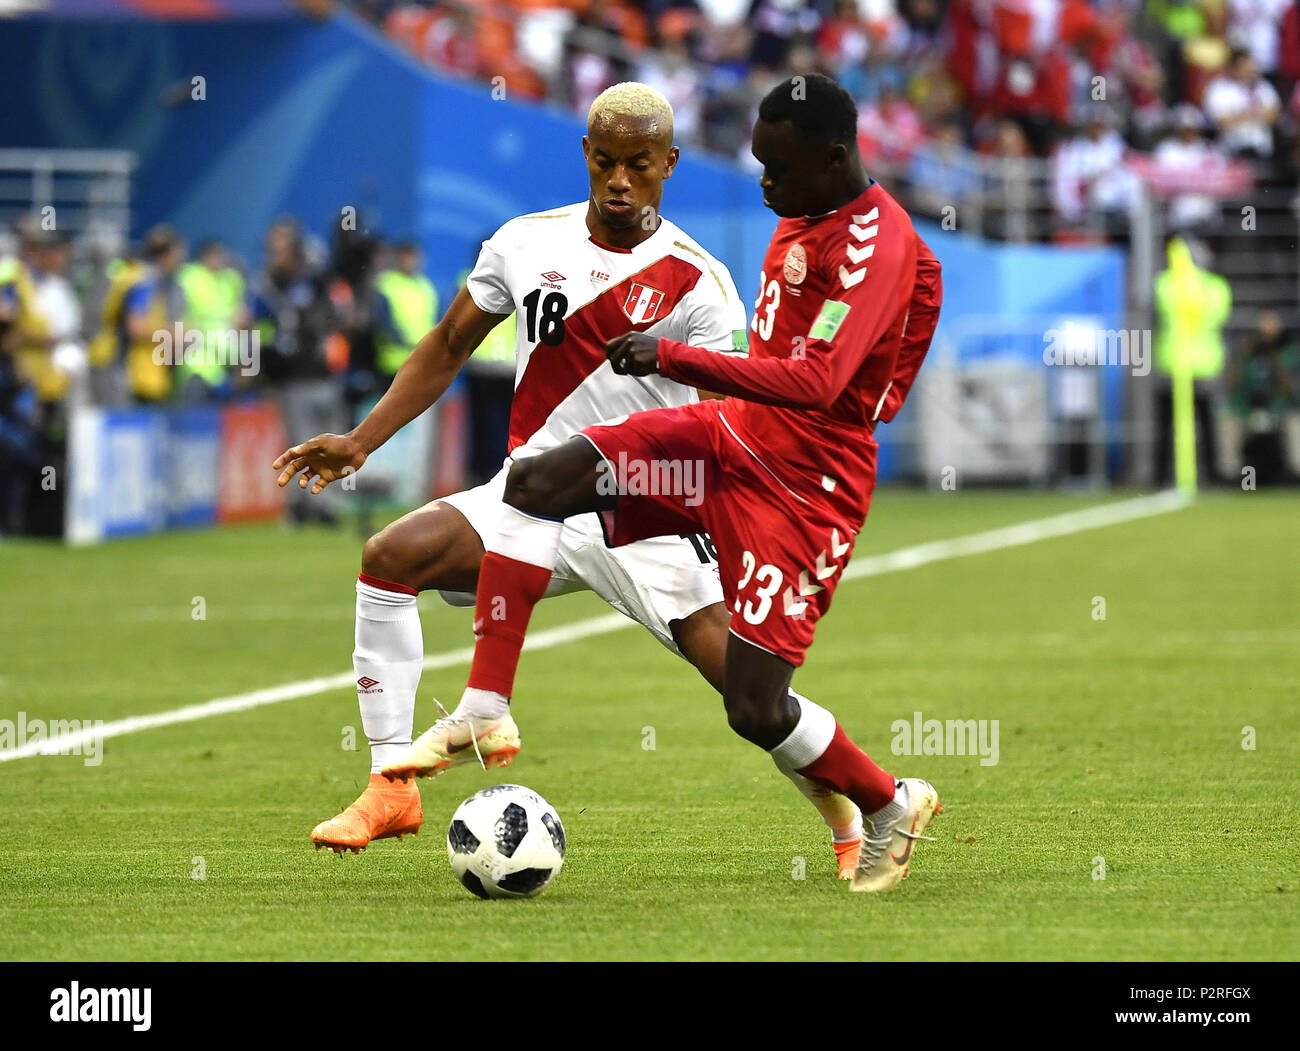 Saransk, Russia. 16th June, 2018. Andre Carrillo (L) of Peru vies with Pione Sisto of Denmark during a group C match between Peru and Denmark at the 2018 FIFA World Cup in Saransk, Russia, June 16, 2018. Credit: He Canling/Xinhua/Alamy Live News Stock Photo